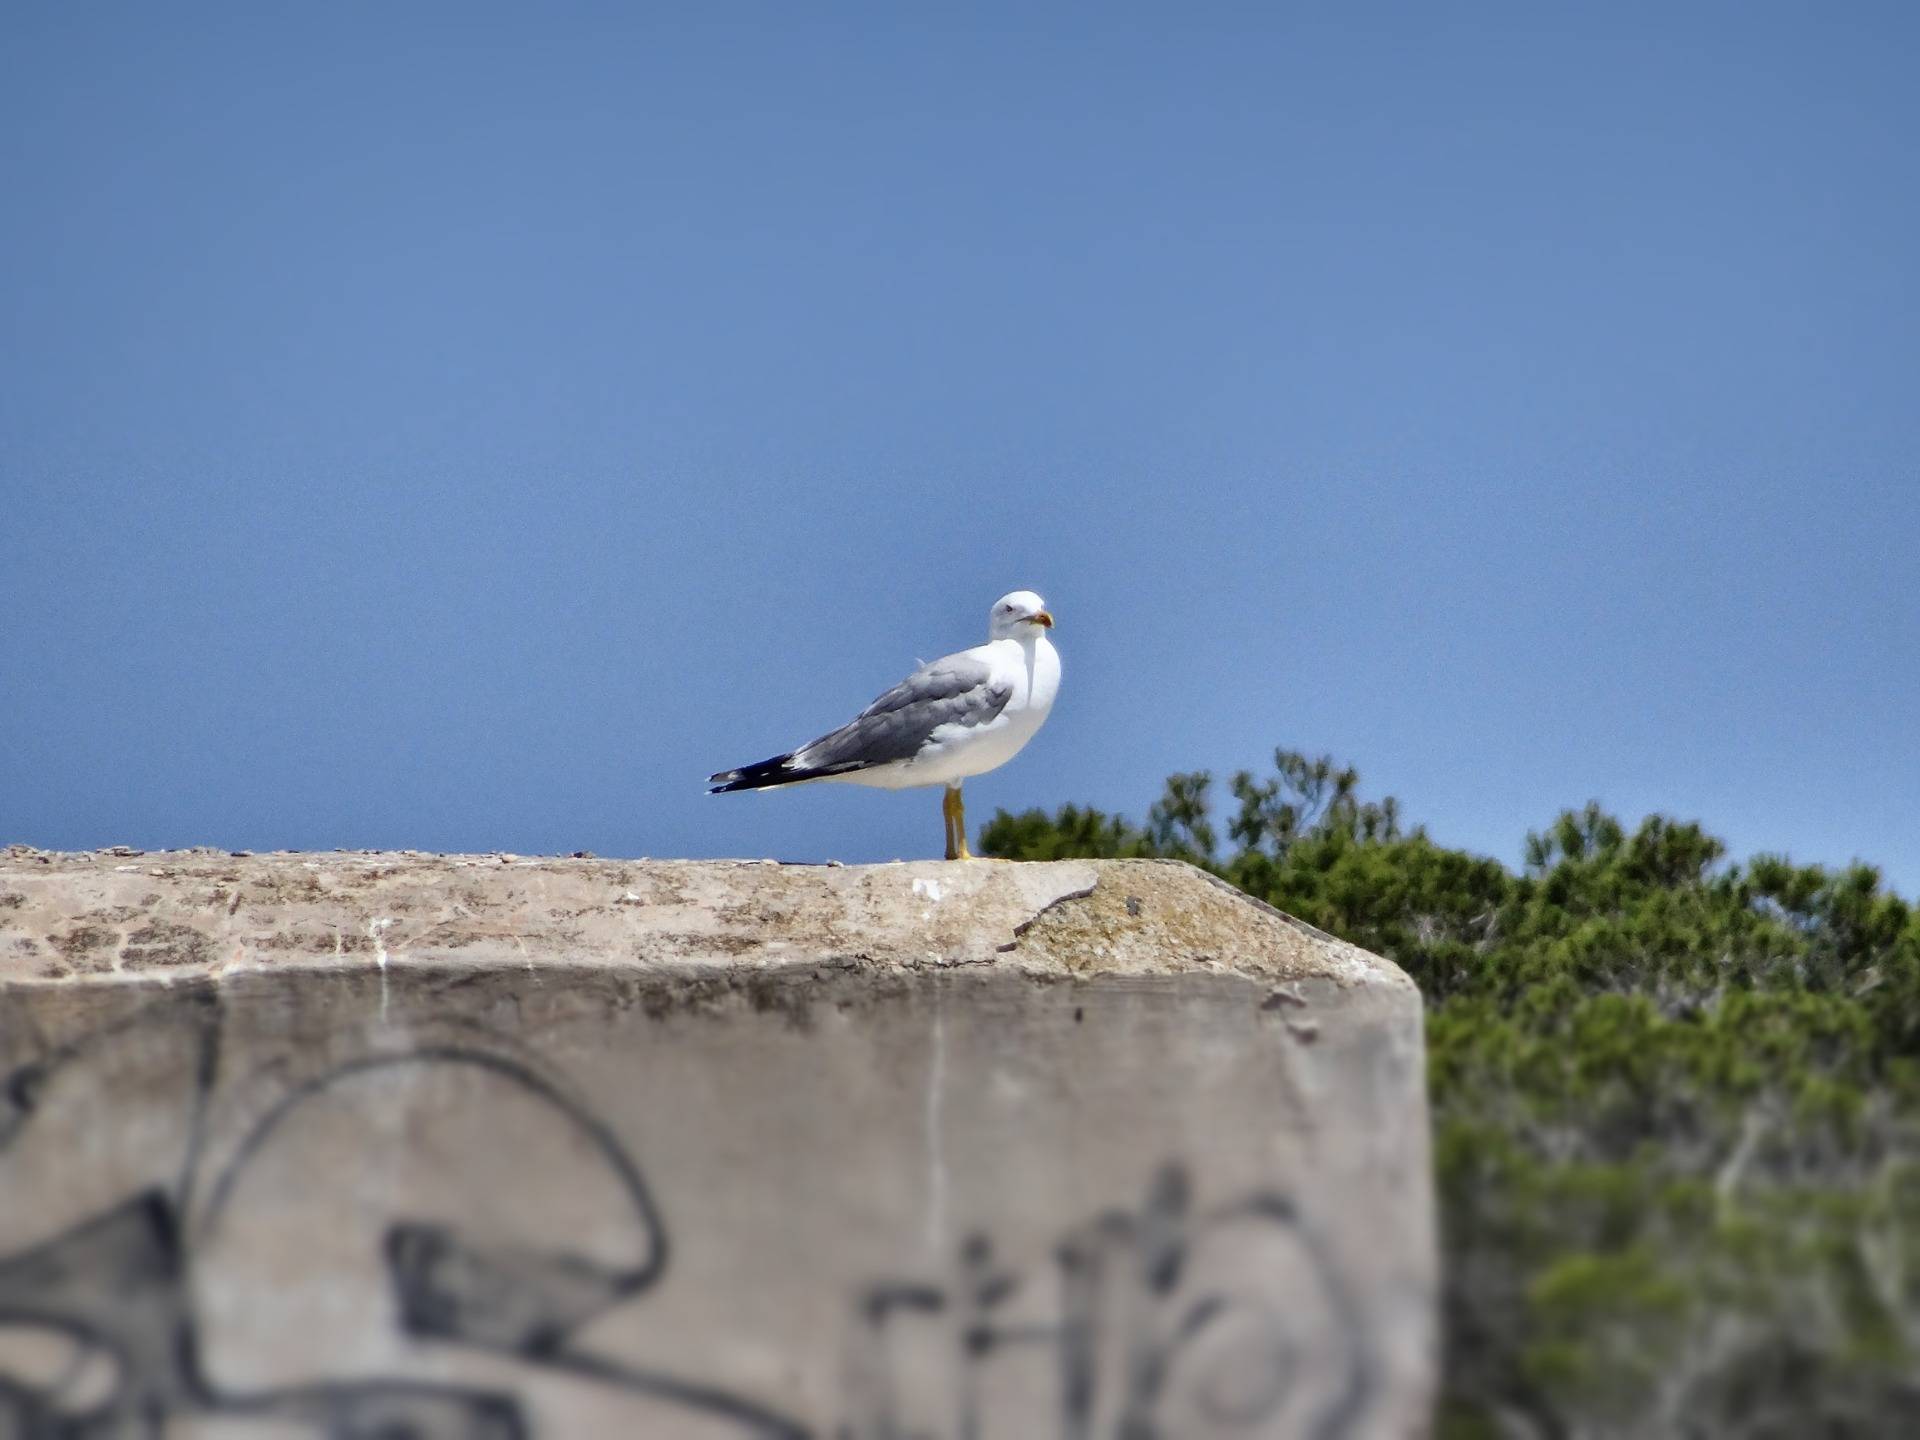 A seagull on concrete, proud of her home base is seems